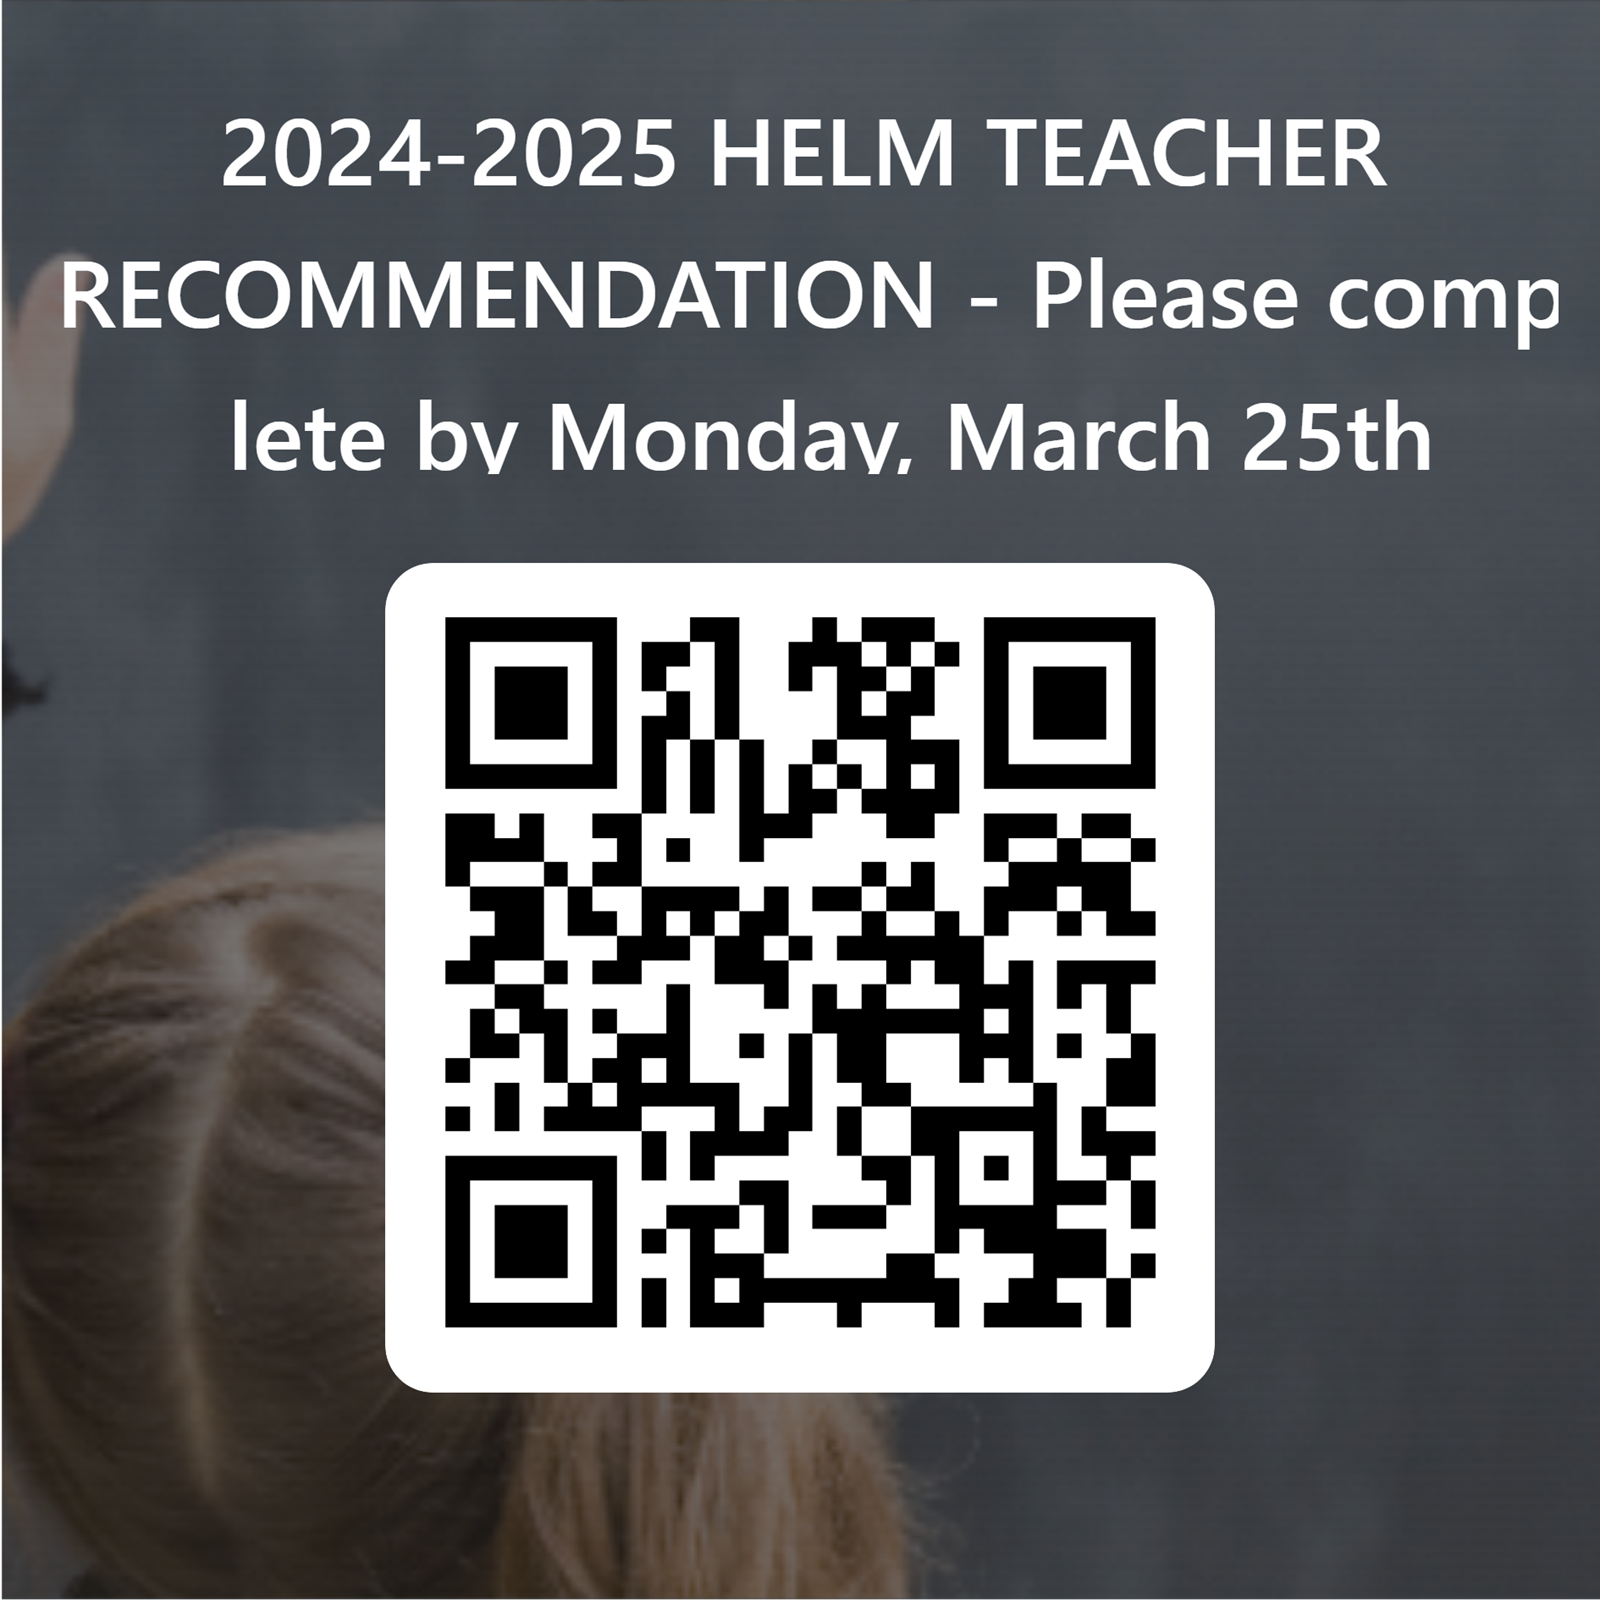 QRCode%20for%202024-2025%20HELM%20TEACHER%20RECOMMENDATION%20-%20Please%20complete%20by%20Monday,%20March%2025th.png